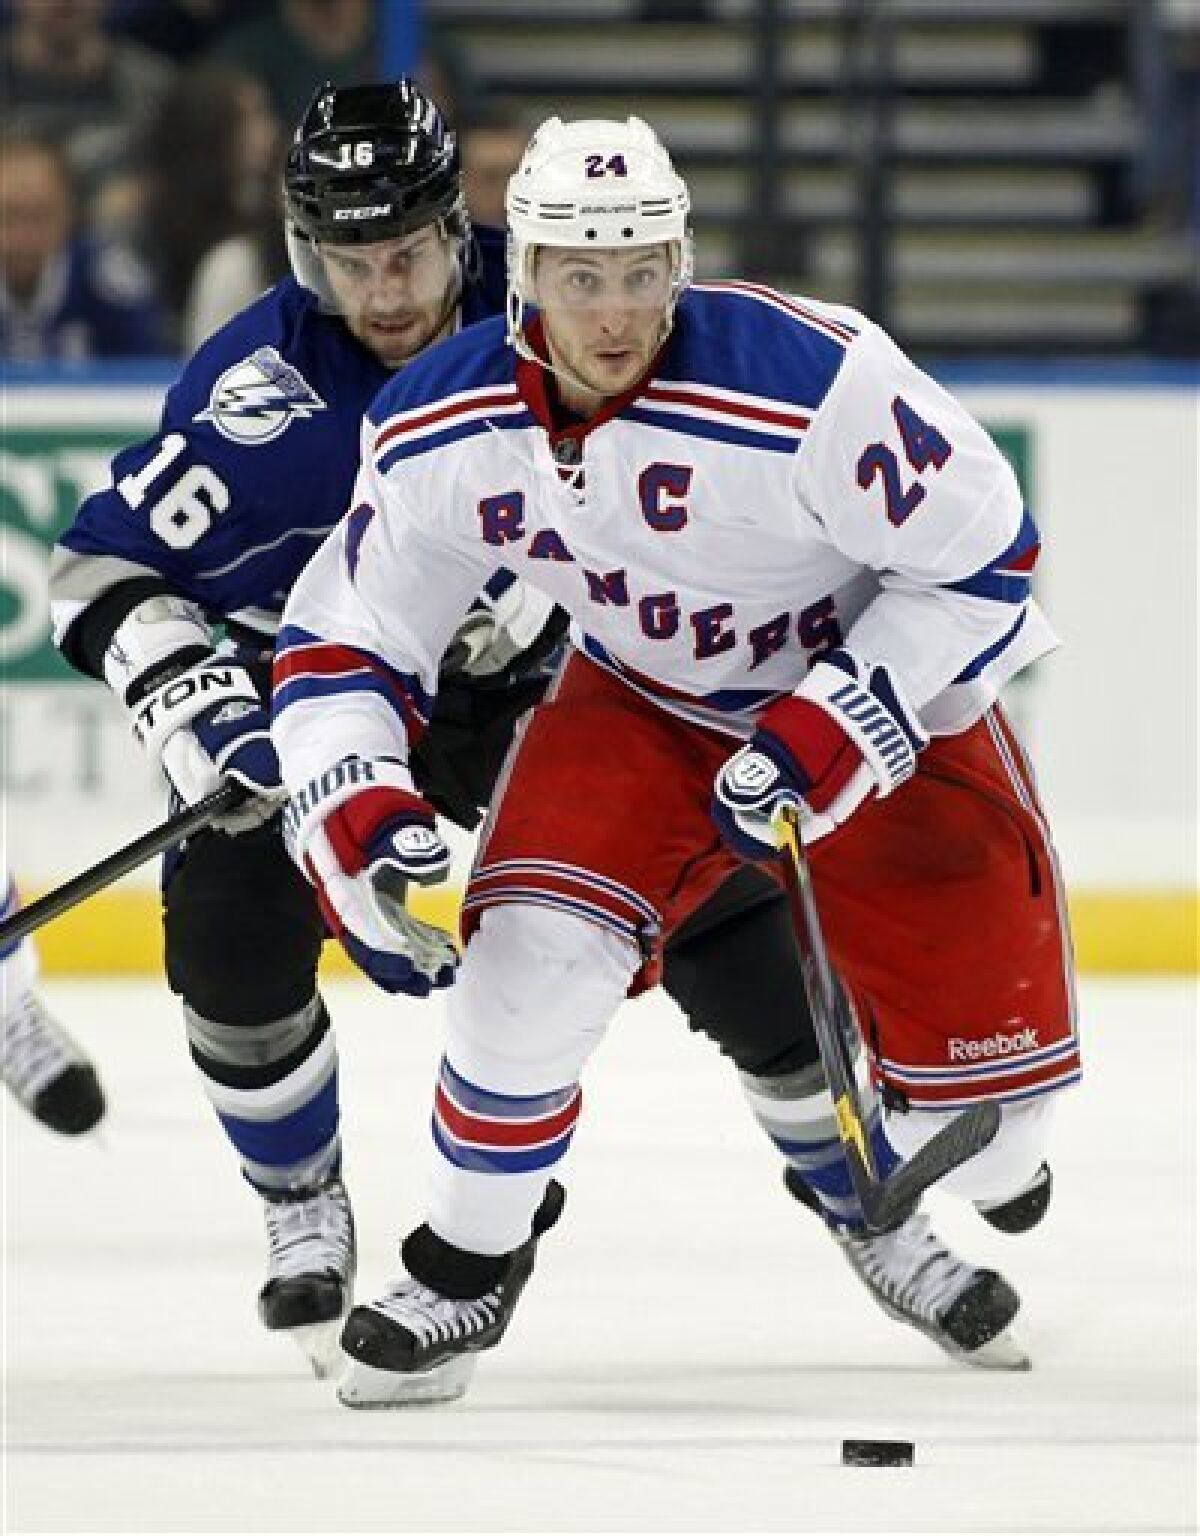 New York Rangers' Ryan Callahan (24) brings the puck up the ice in front of Tampa Bay Lightning's Teddy Purcell during the first period of an NHL hockey game on Saturday, Dec. 3, 2011, in Tampa, Fla. (AP Photo/Mike Carlson)